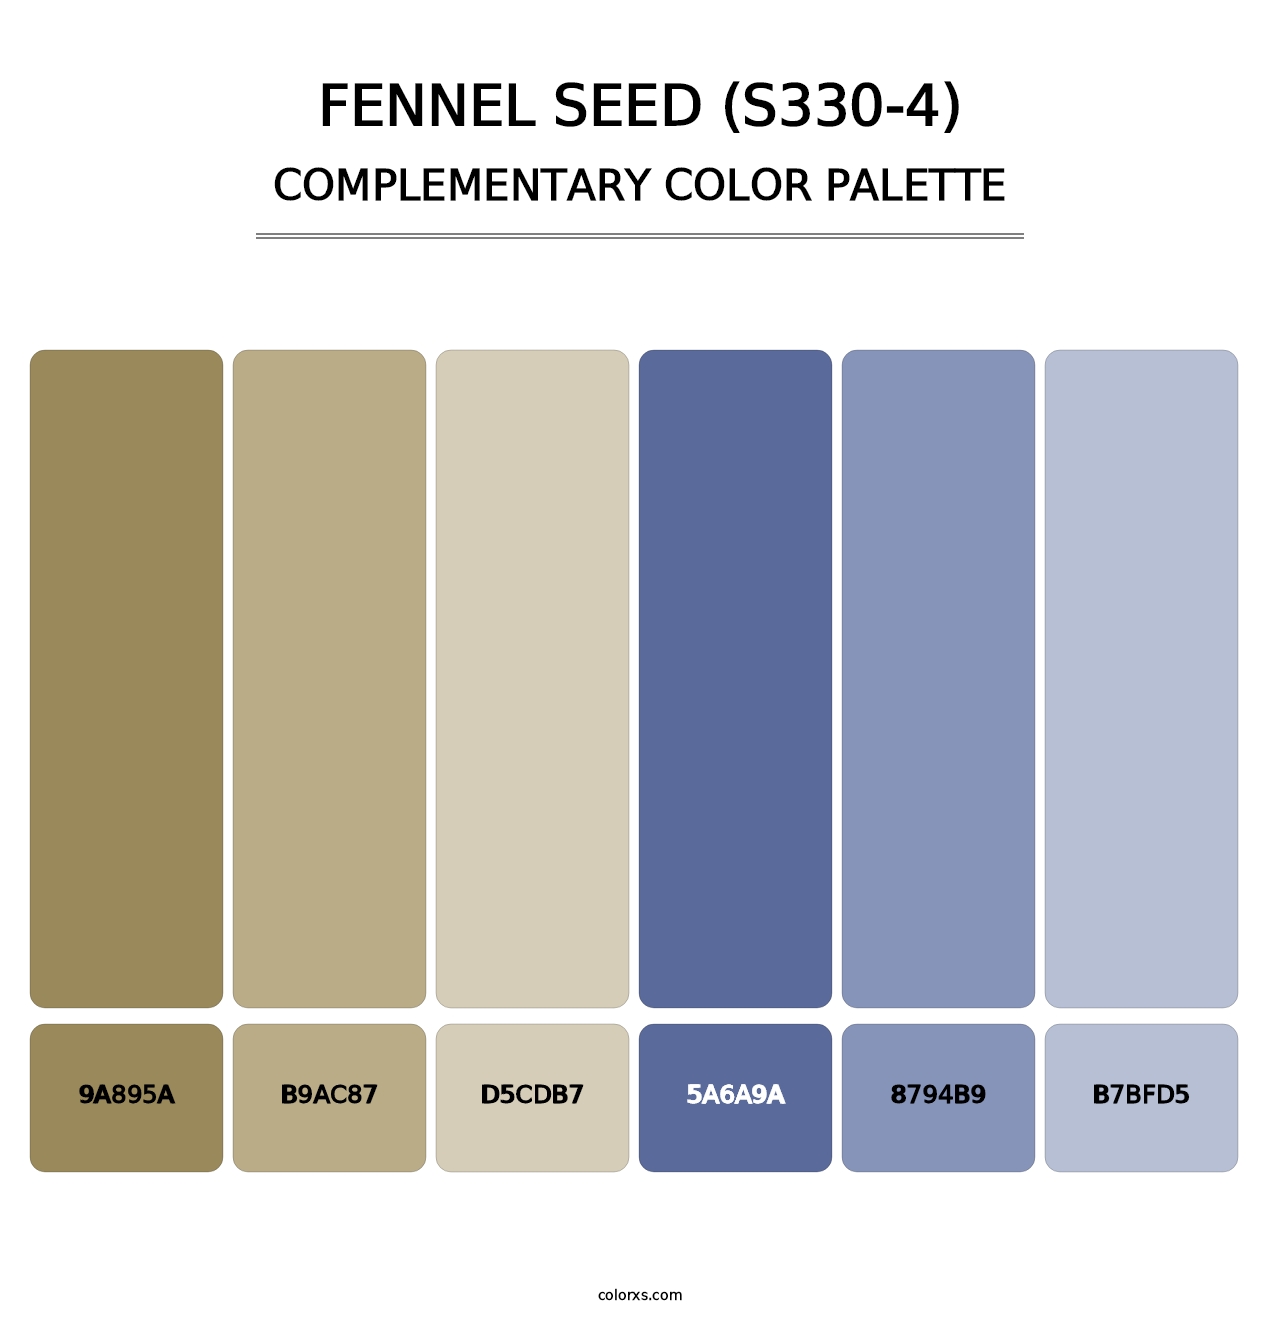 Fennel Seed (S330-4) - Complementary Color Palette